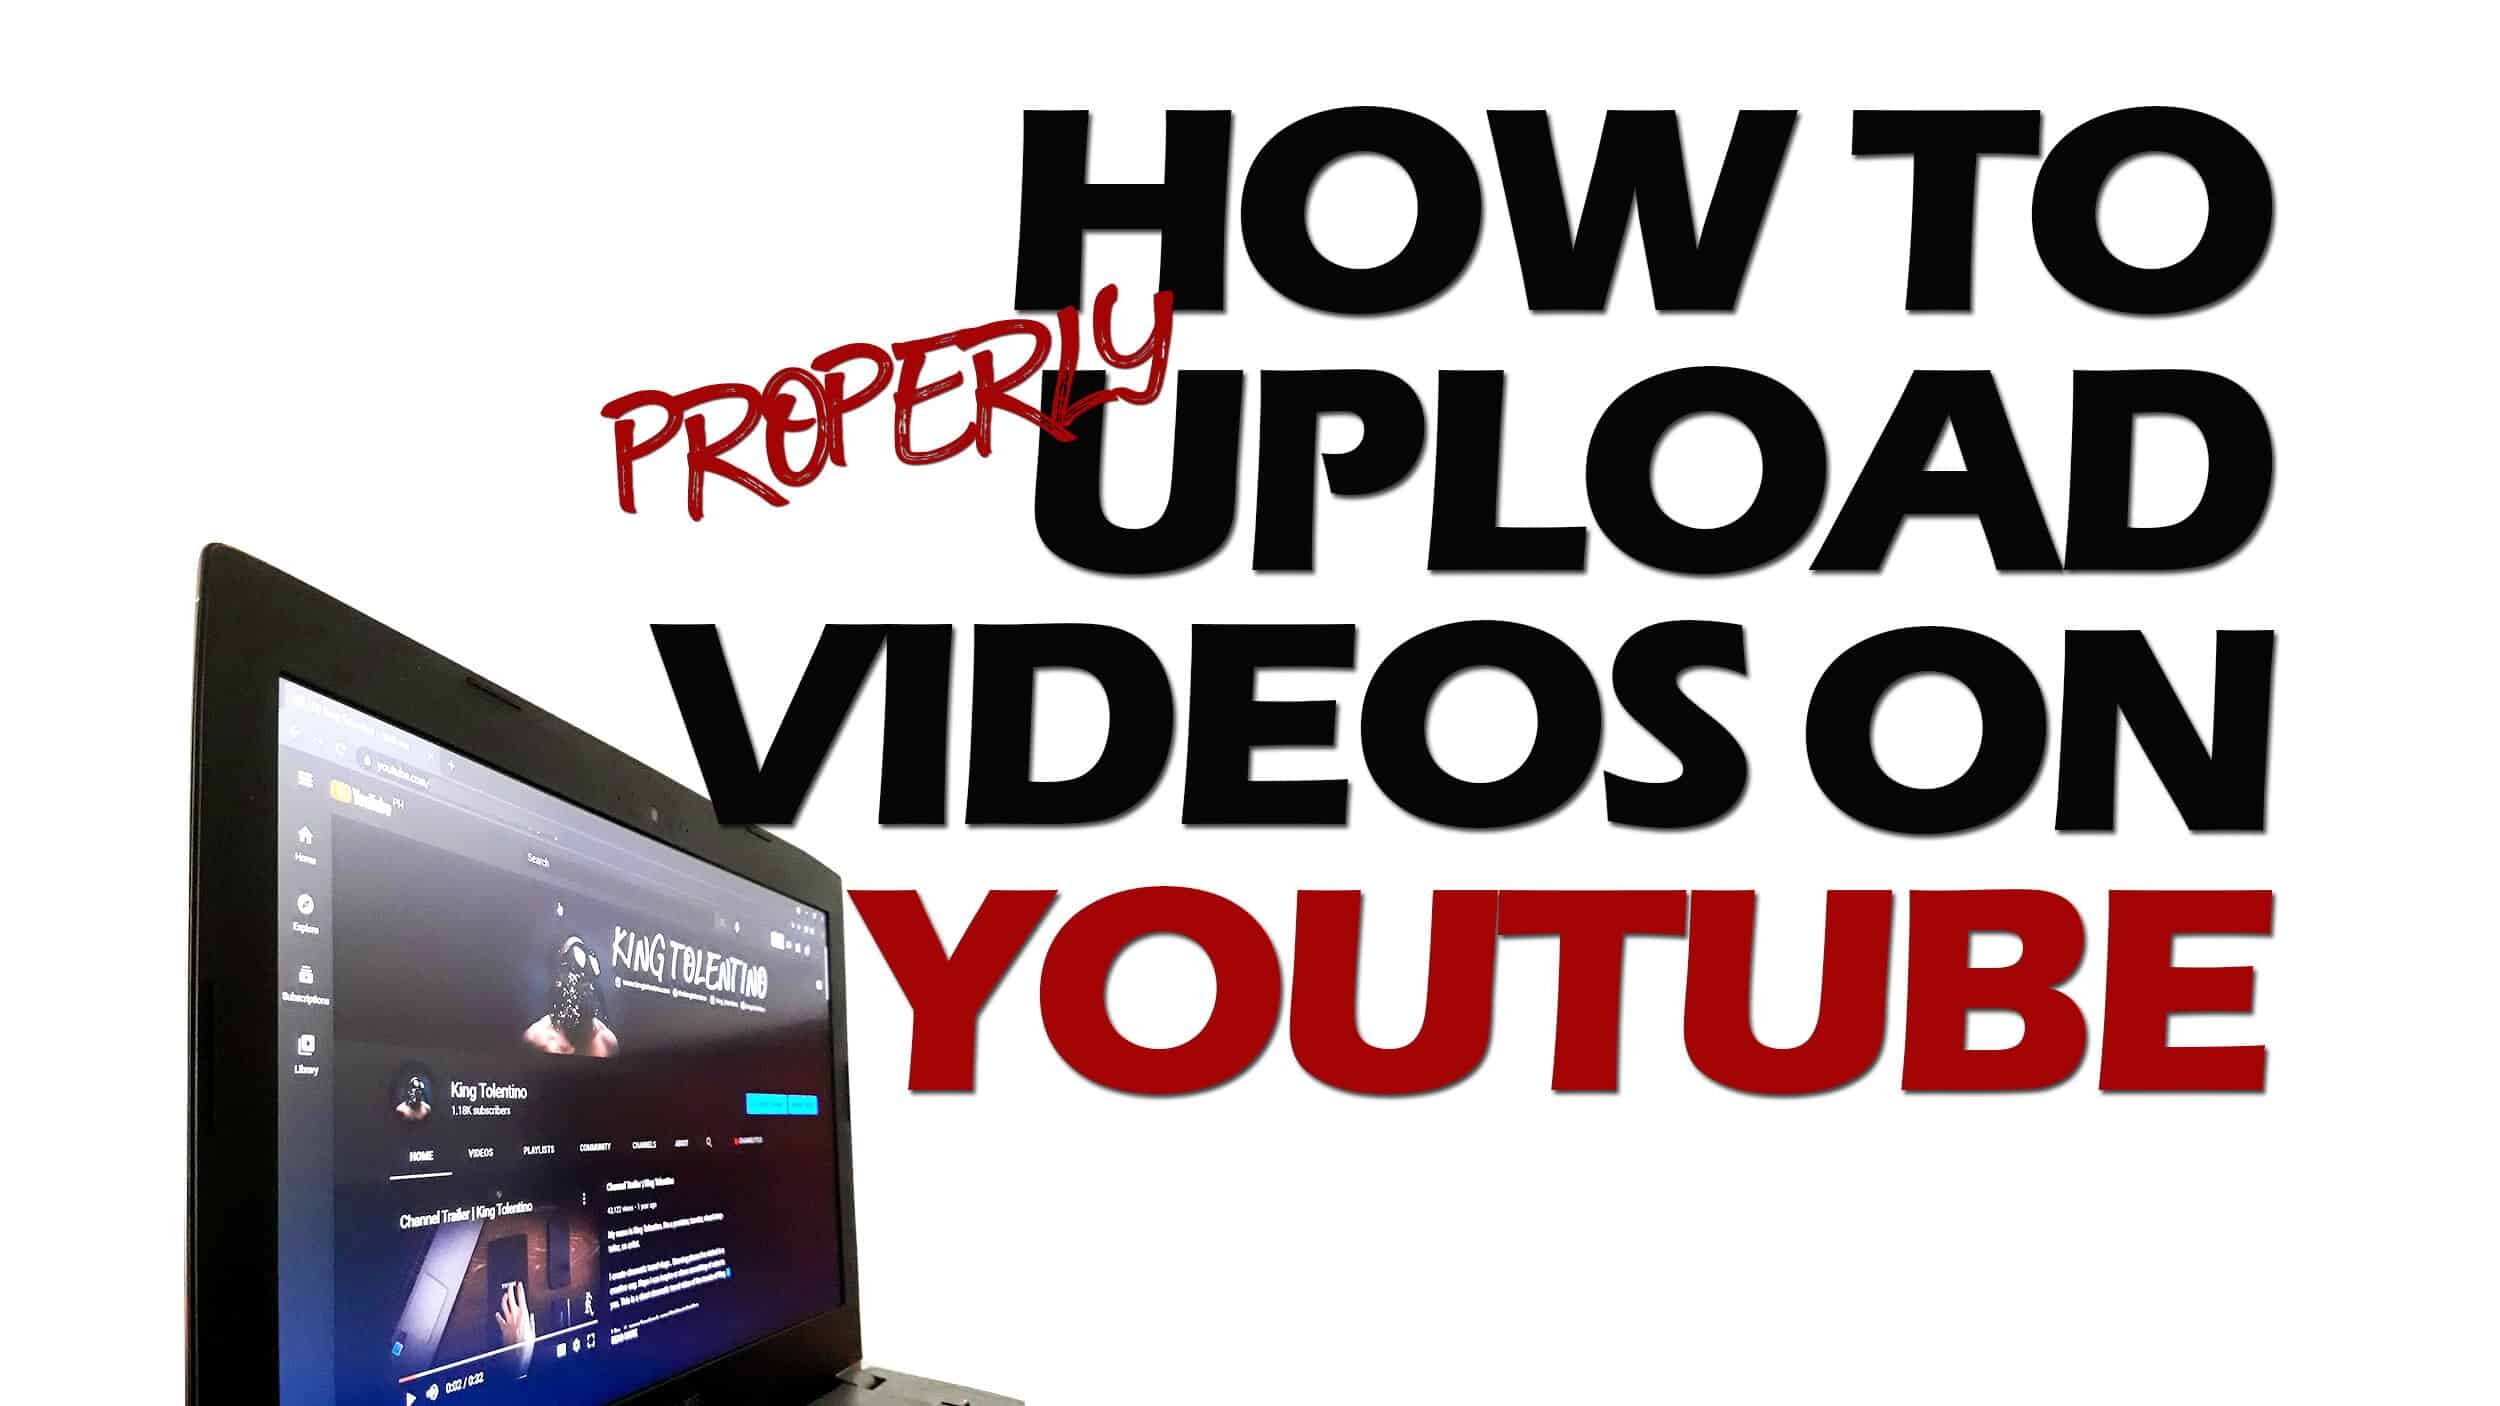 How To Properly Upload Videos On